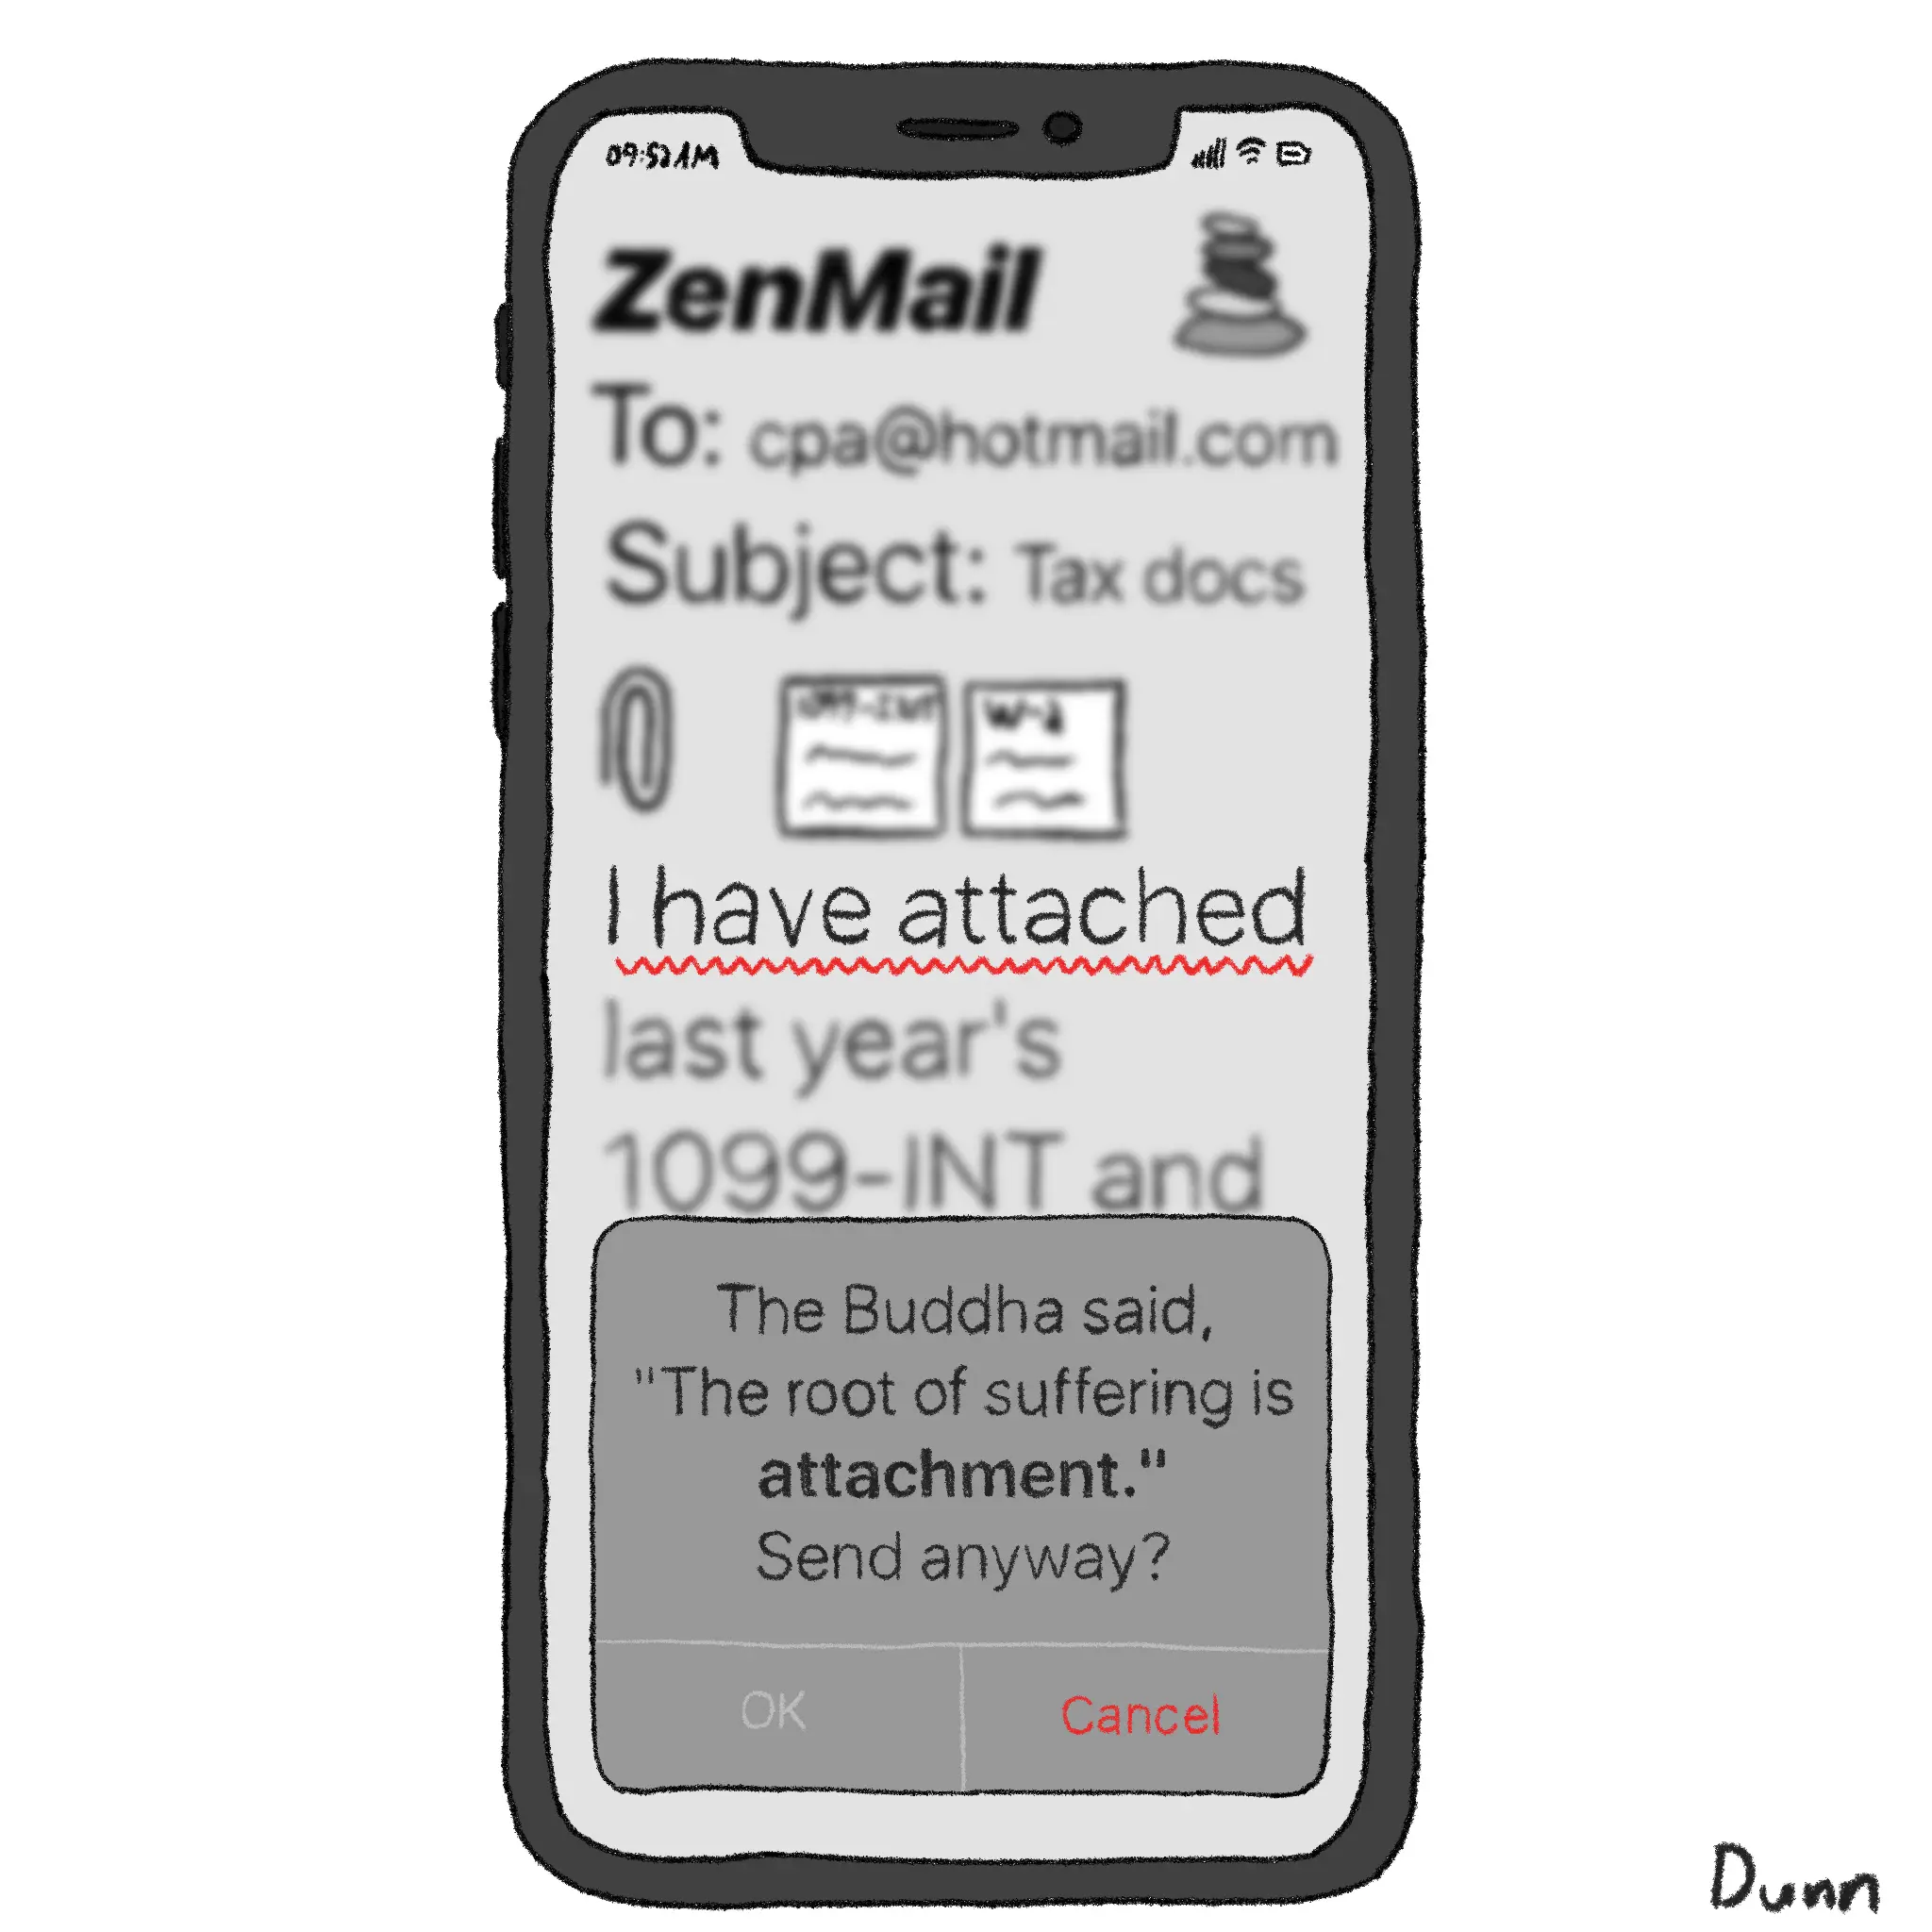 image from ZenMail